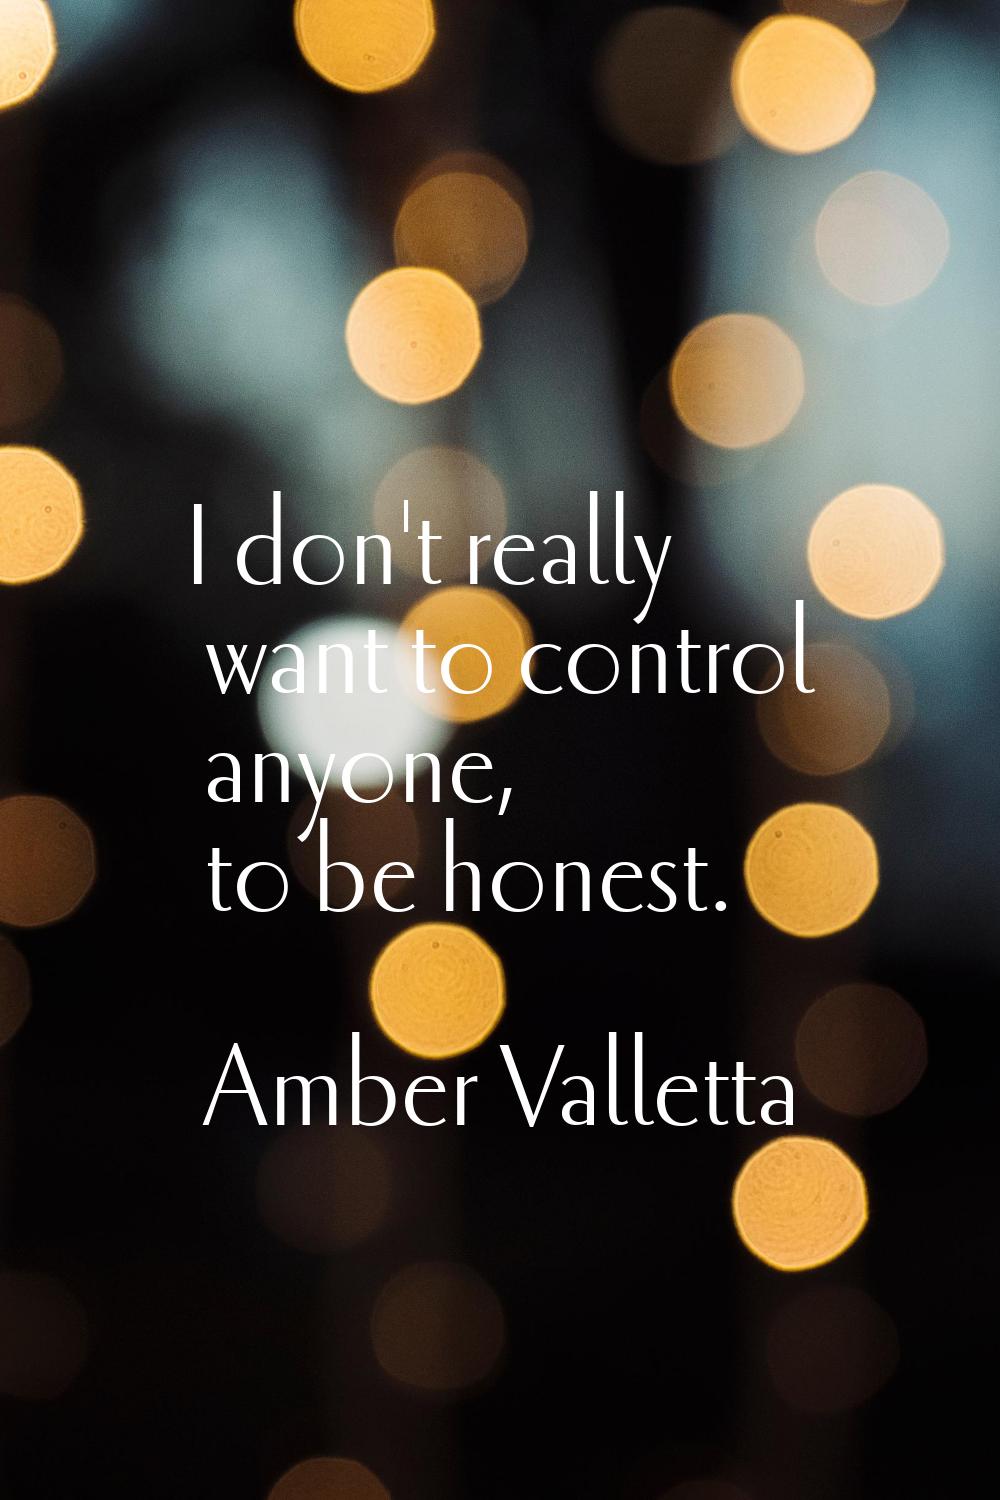 I don't really want to control anyone, to be honest.